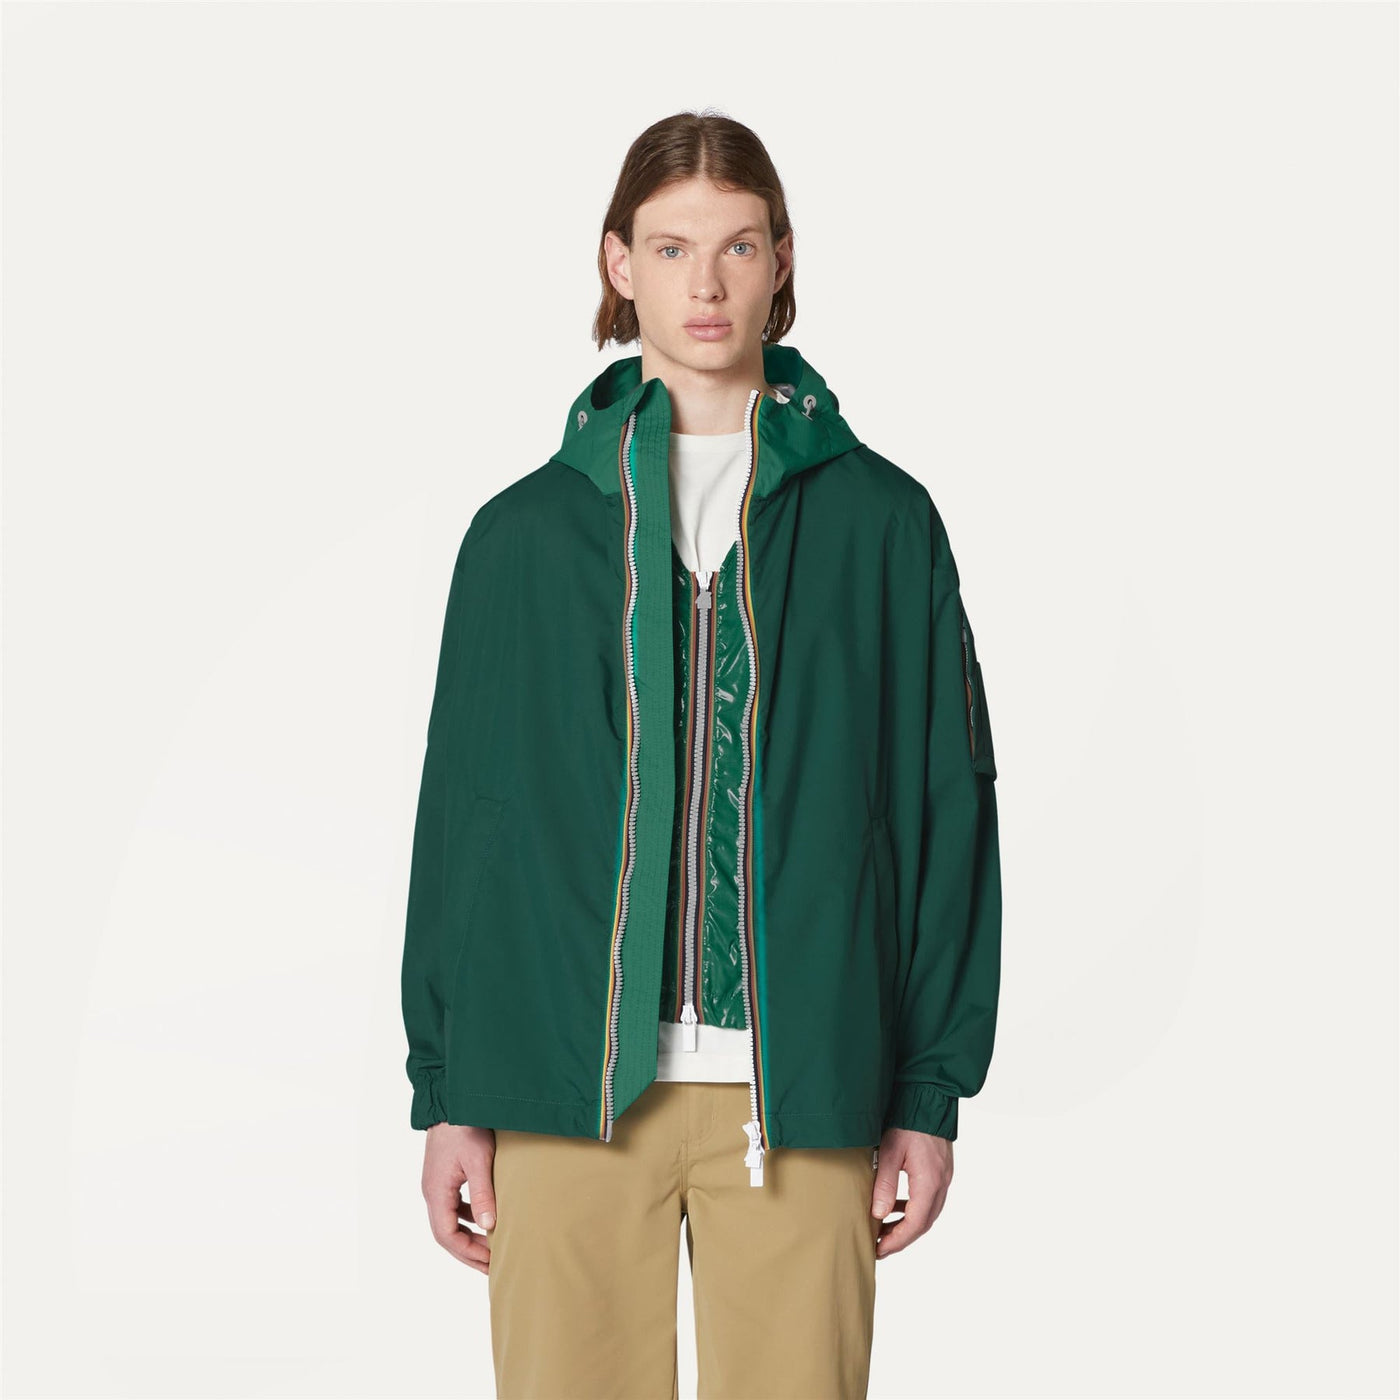 CLAUDEL 2.1 AMIABLE SILVER - JACKET - UNISEX - GREEN PINE